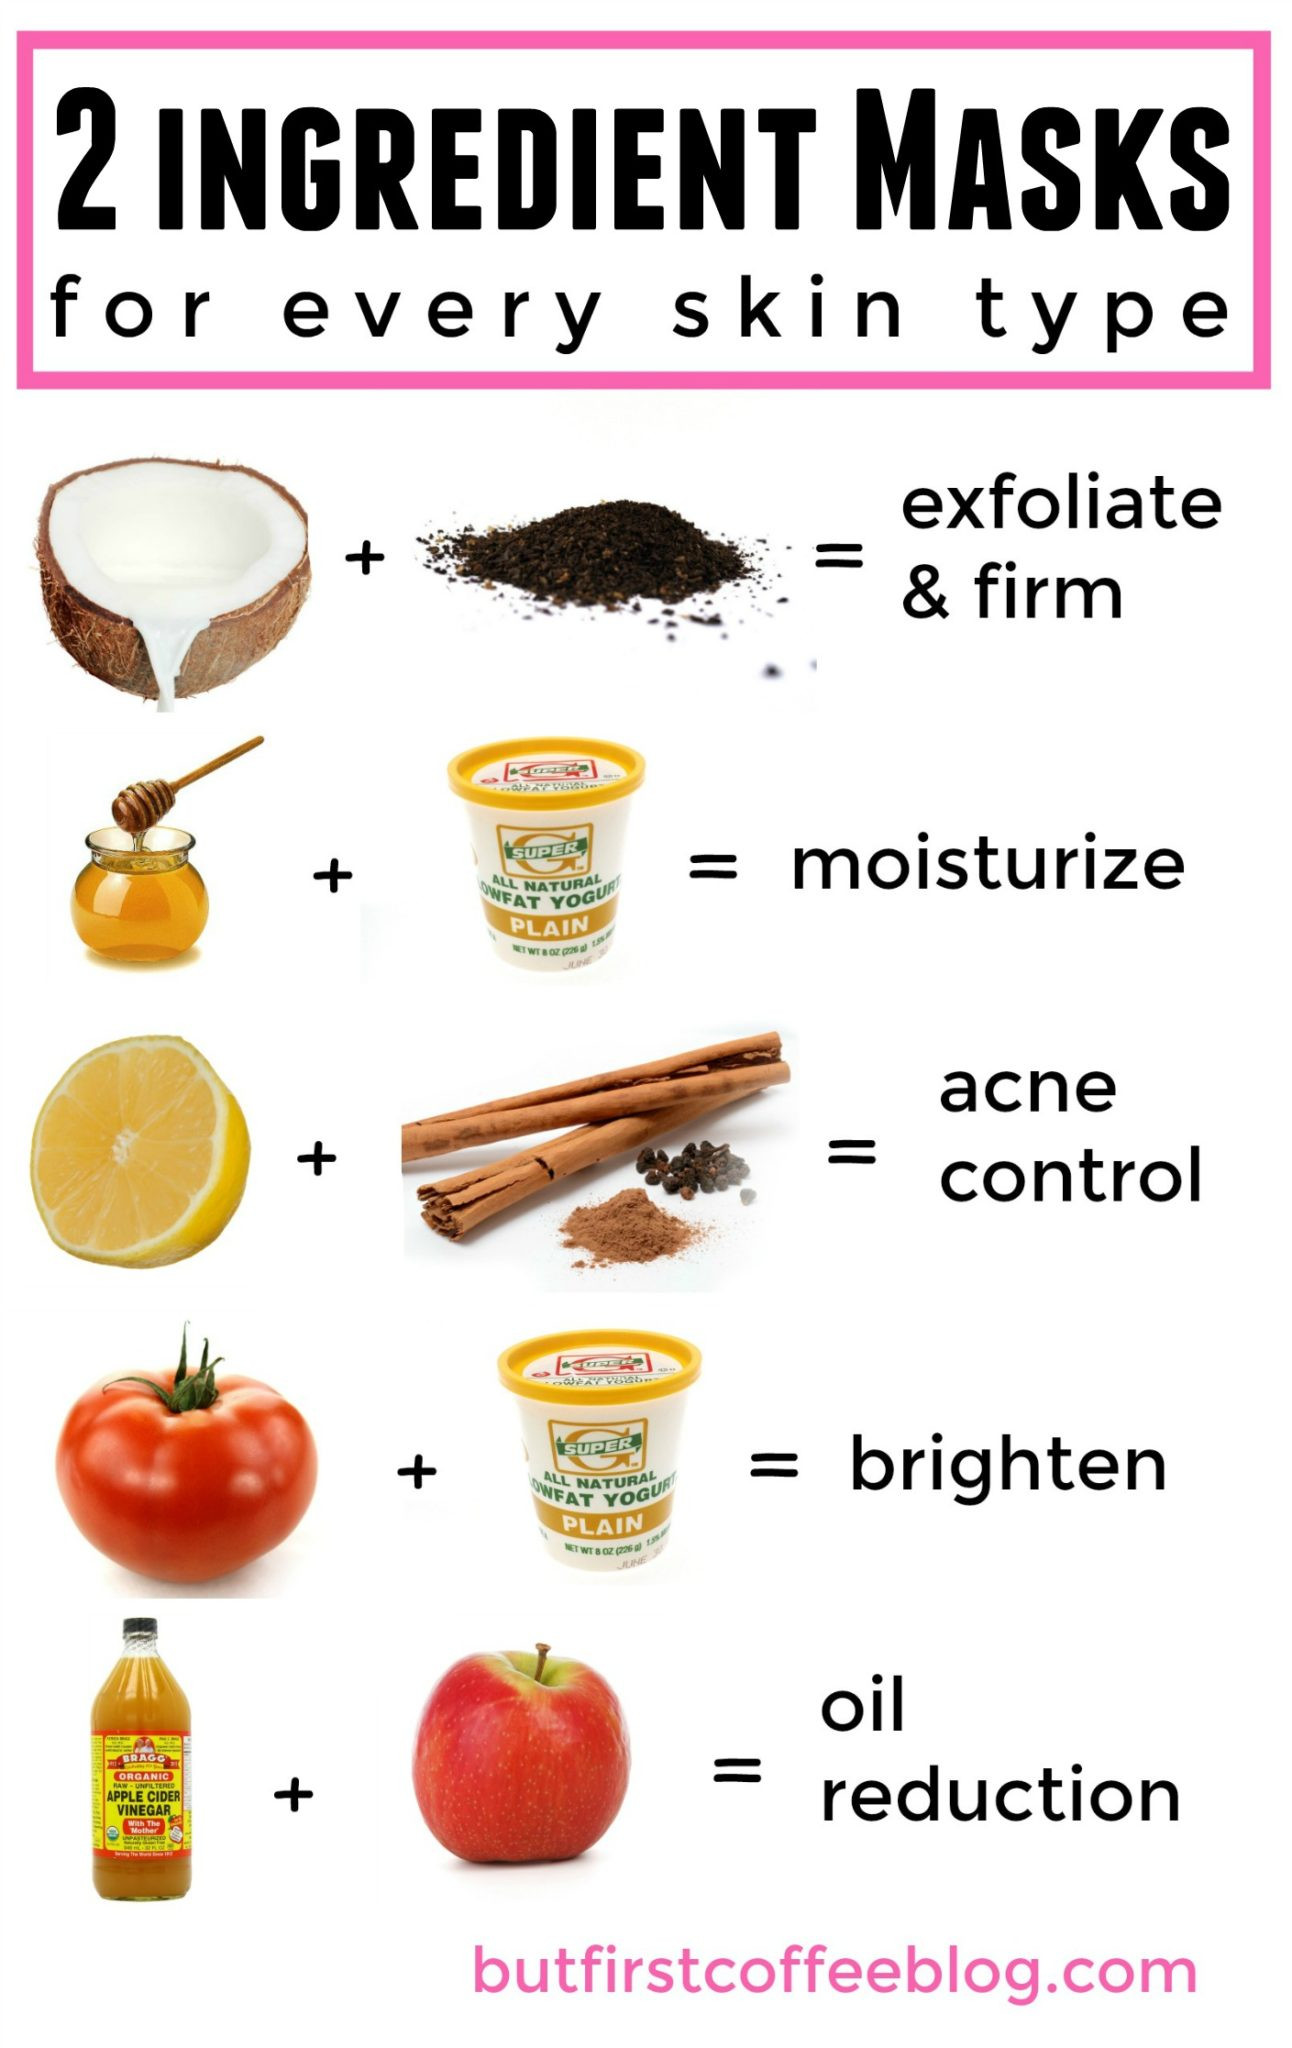 DIY Face Mask For Dry Skin And Acne
 2 Ingre nt D I Y Face Masks for Every Skin Type